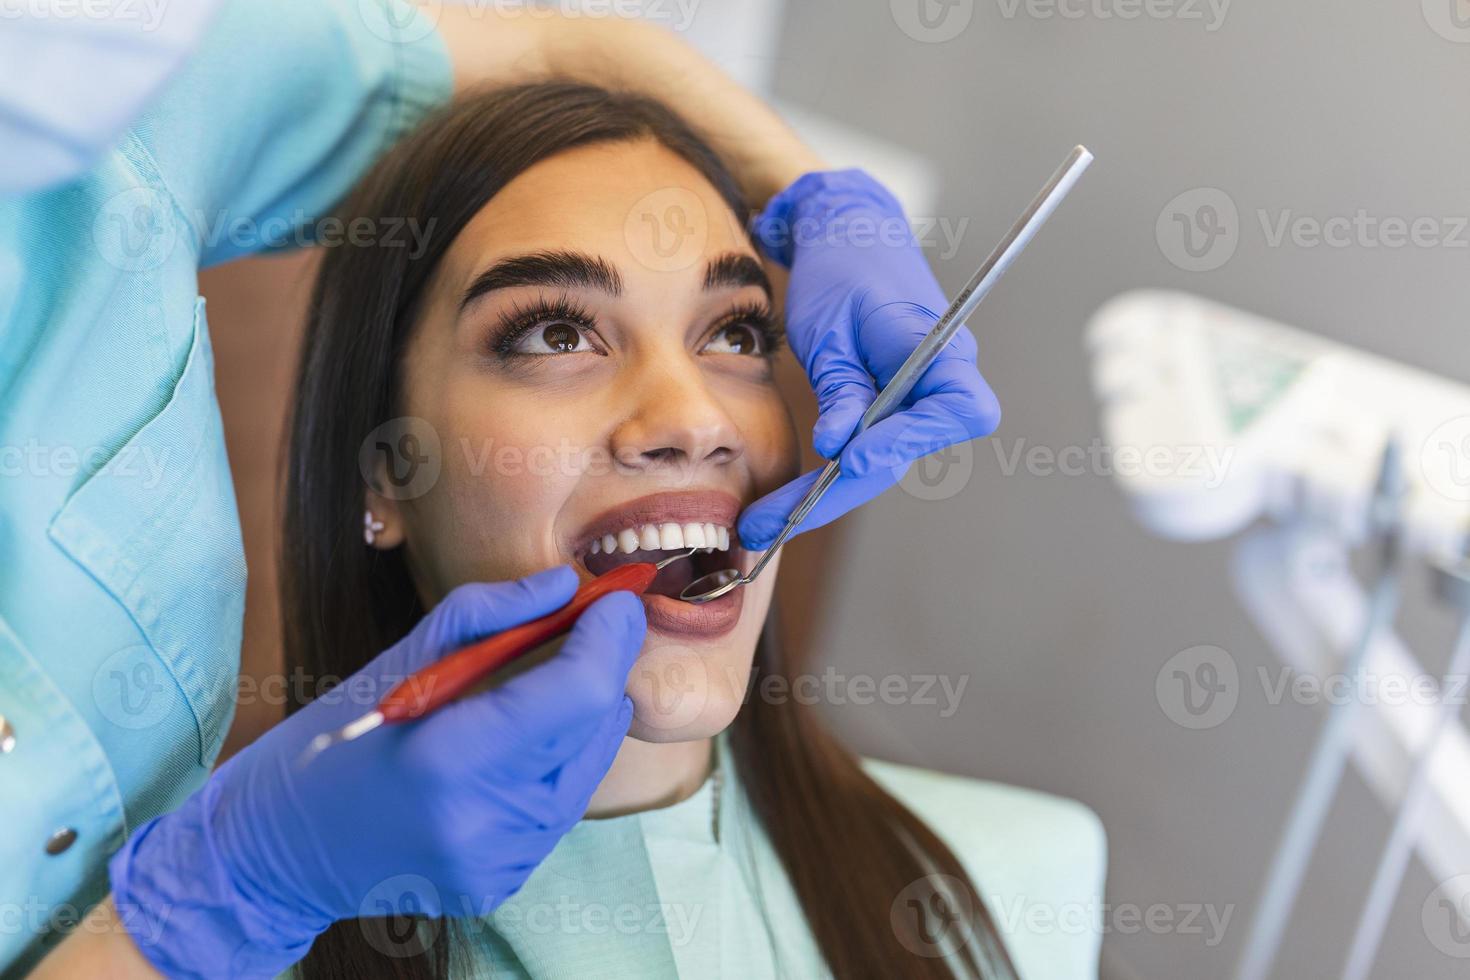 Smiling brunette woman being examined by dentist at dental clinic. Hands of a doctor holding dental instruments near patient's mouth. Healthy teeth and medicine concept photo